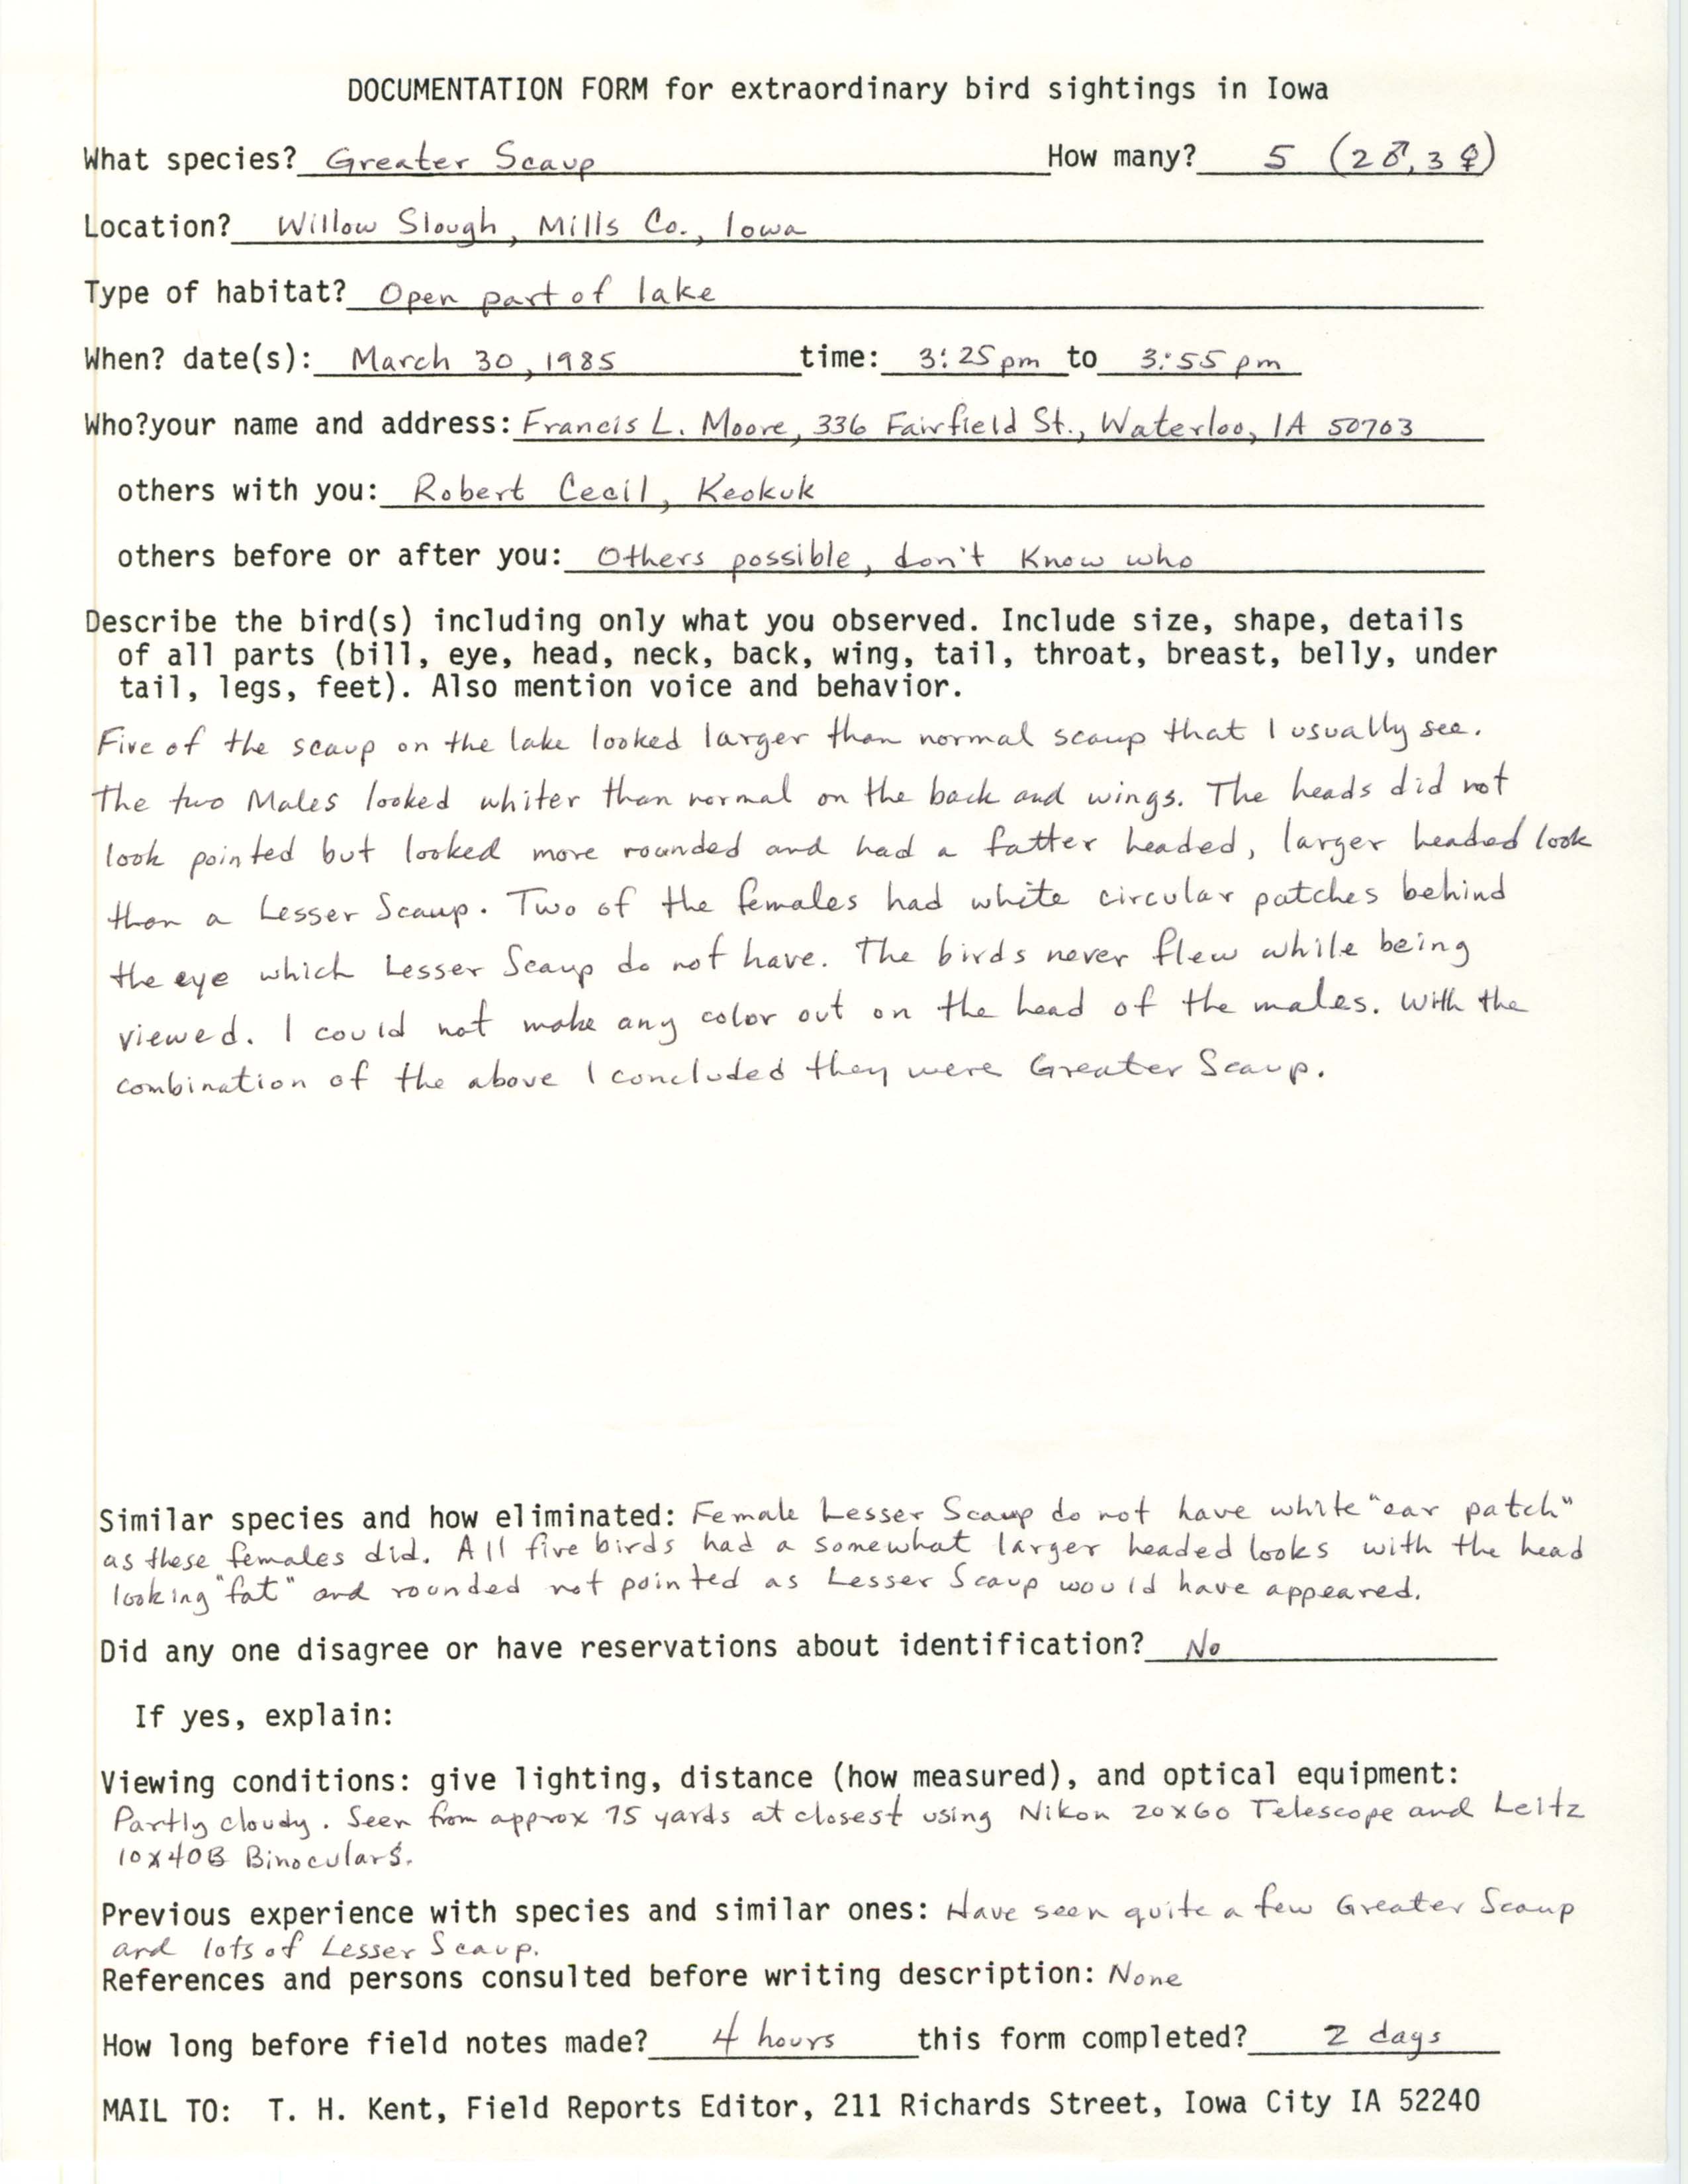 Rare bird documentation form for Greater Scaup at Willow Slough, 1985